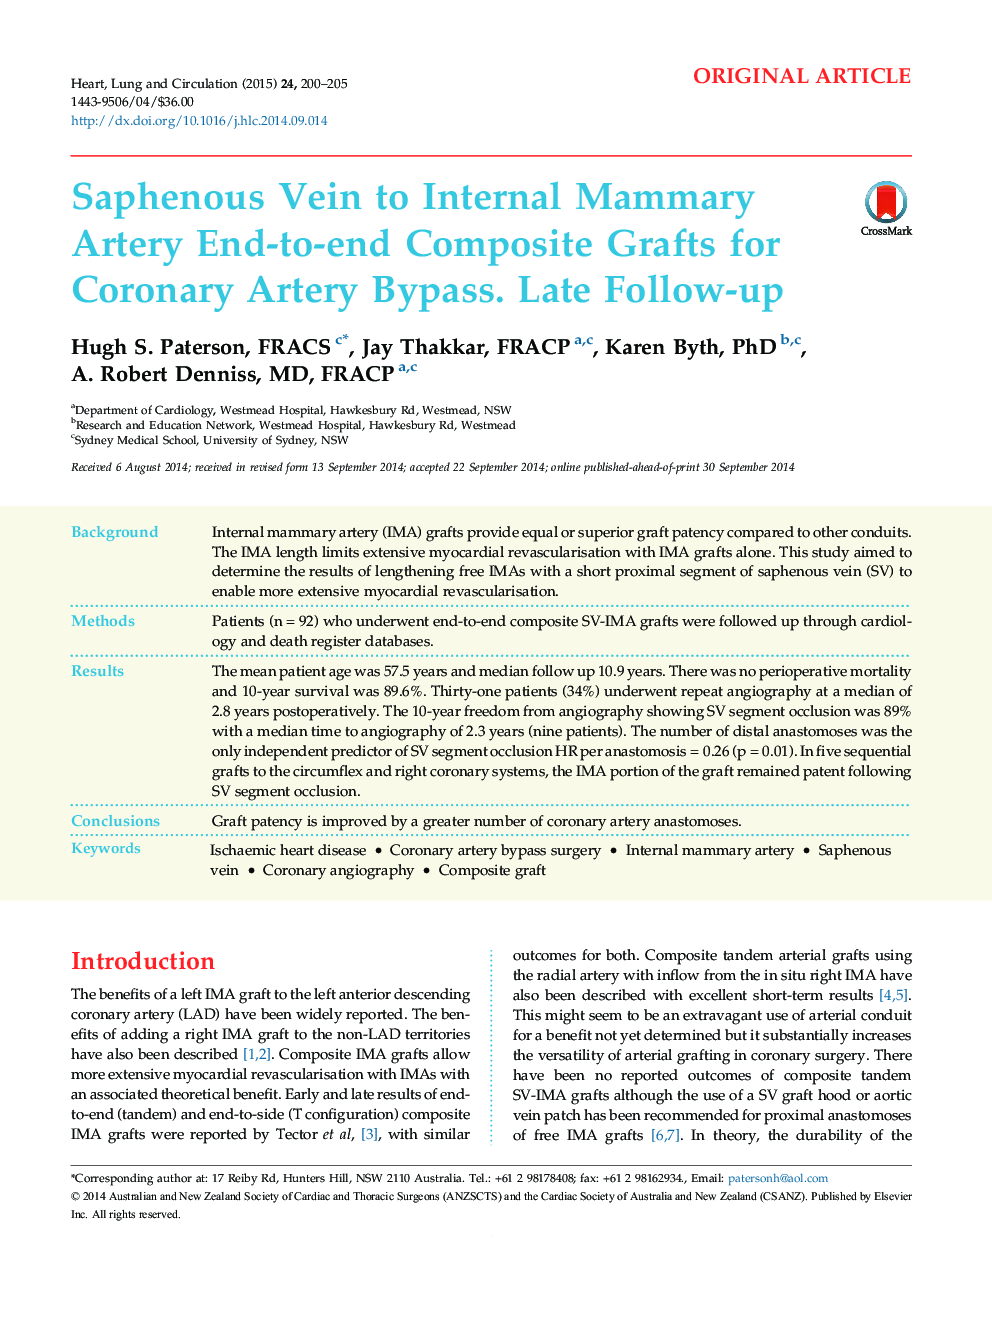 Saphenous Vein to Internal Mammary Artery End-to-end Composite Grafts for Coronary Artery Bypass. Late Follow-up